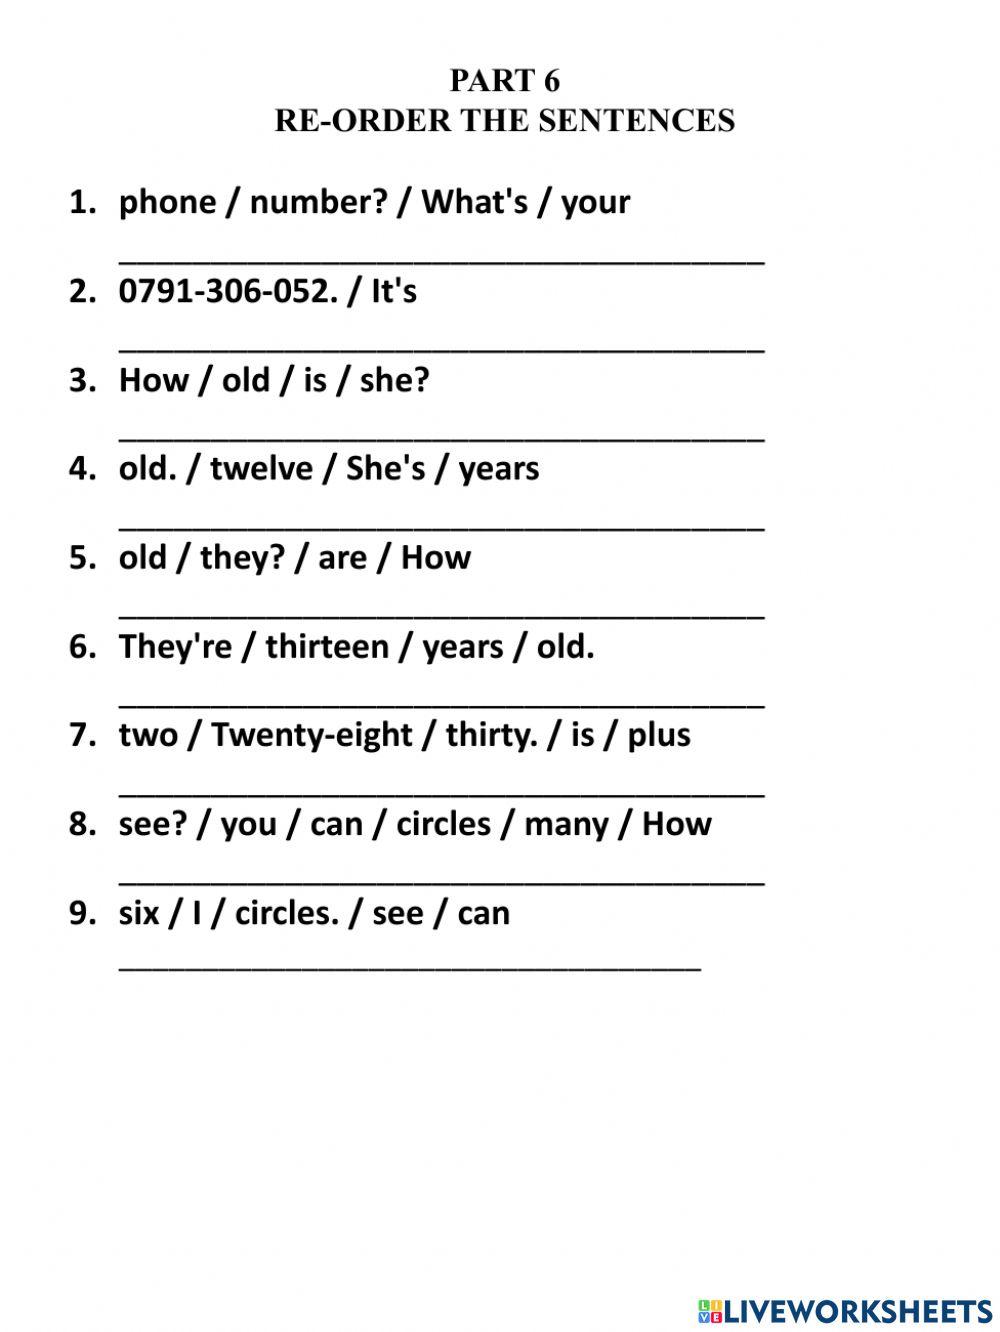 Reading anh Writing Test Theme 1- Smart 3